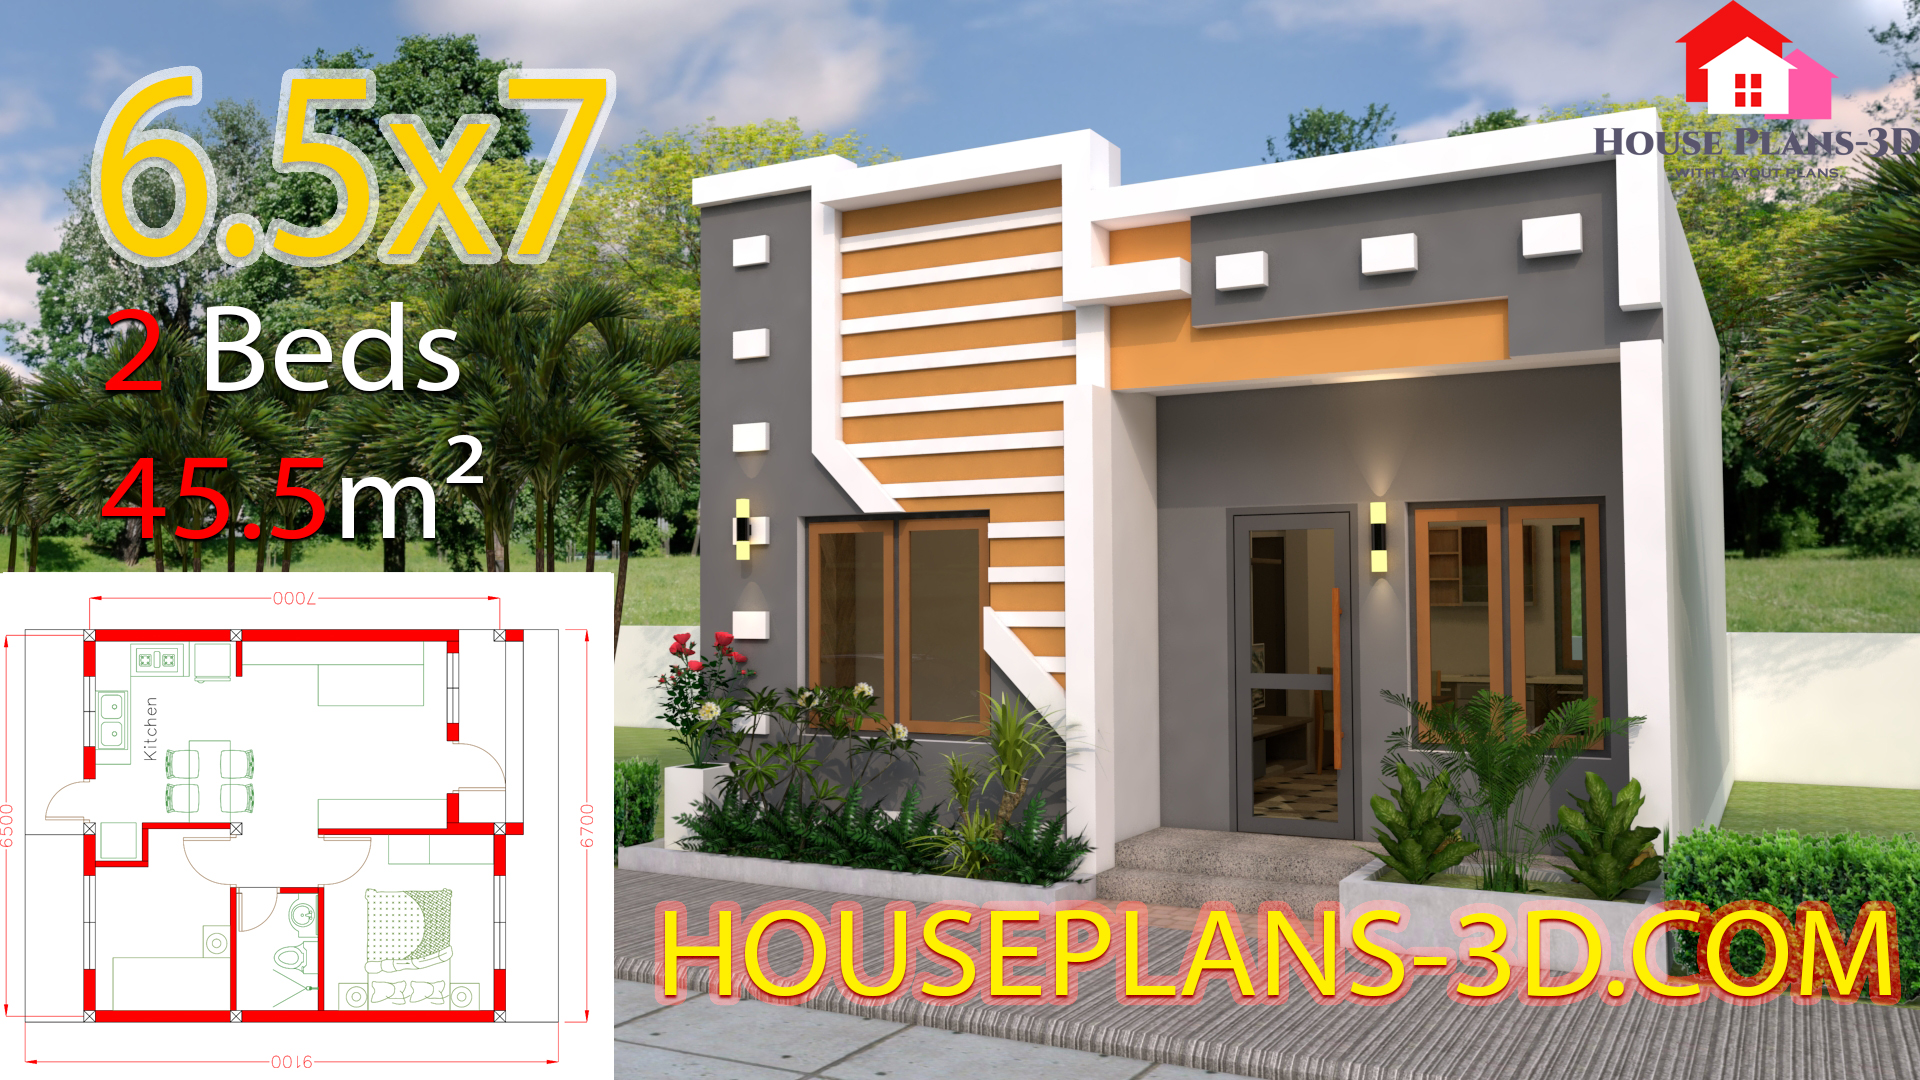 Small House Design 6 5x7 With 2 Bedrooms Full Plans